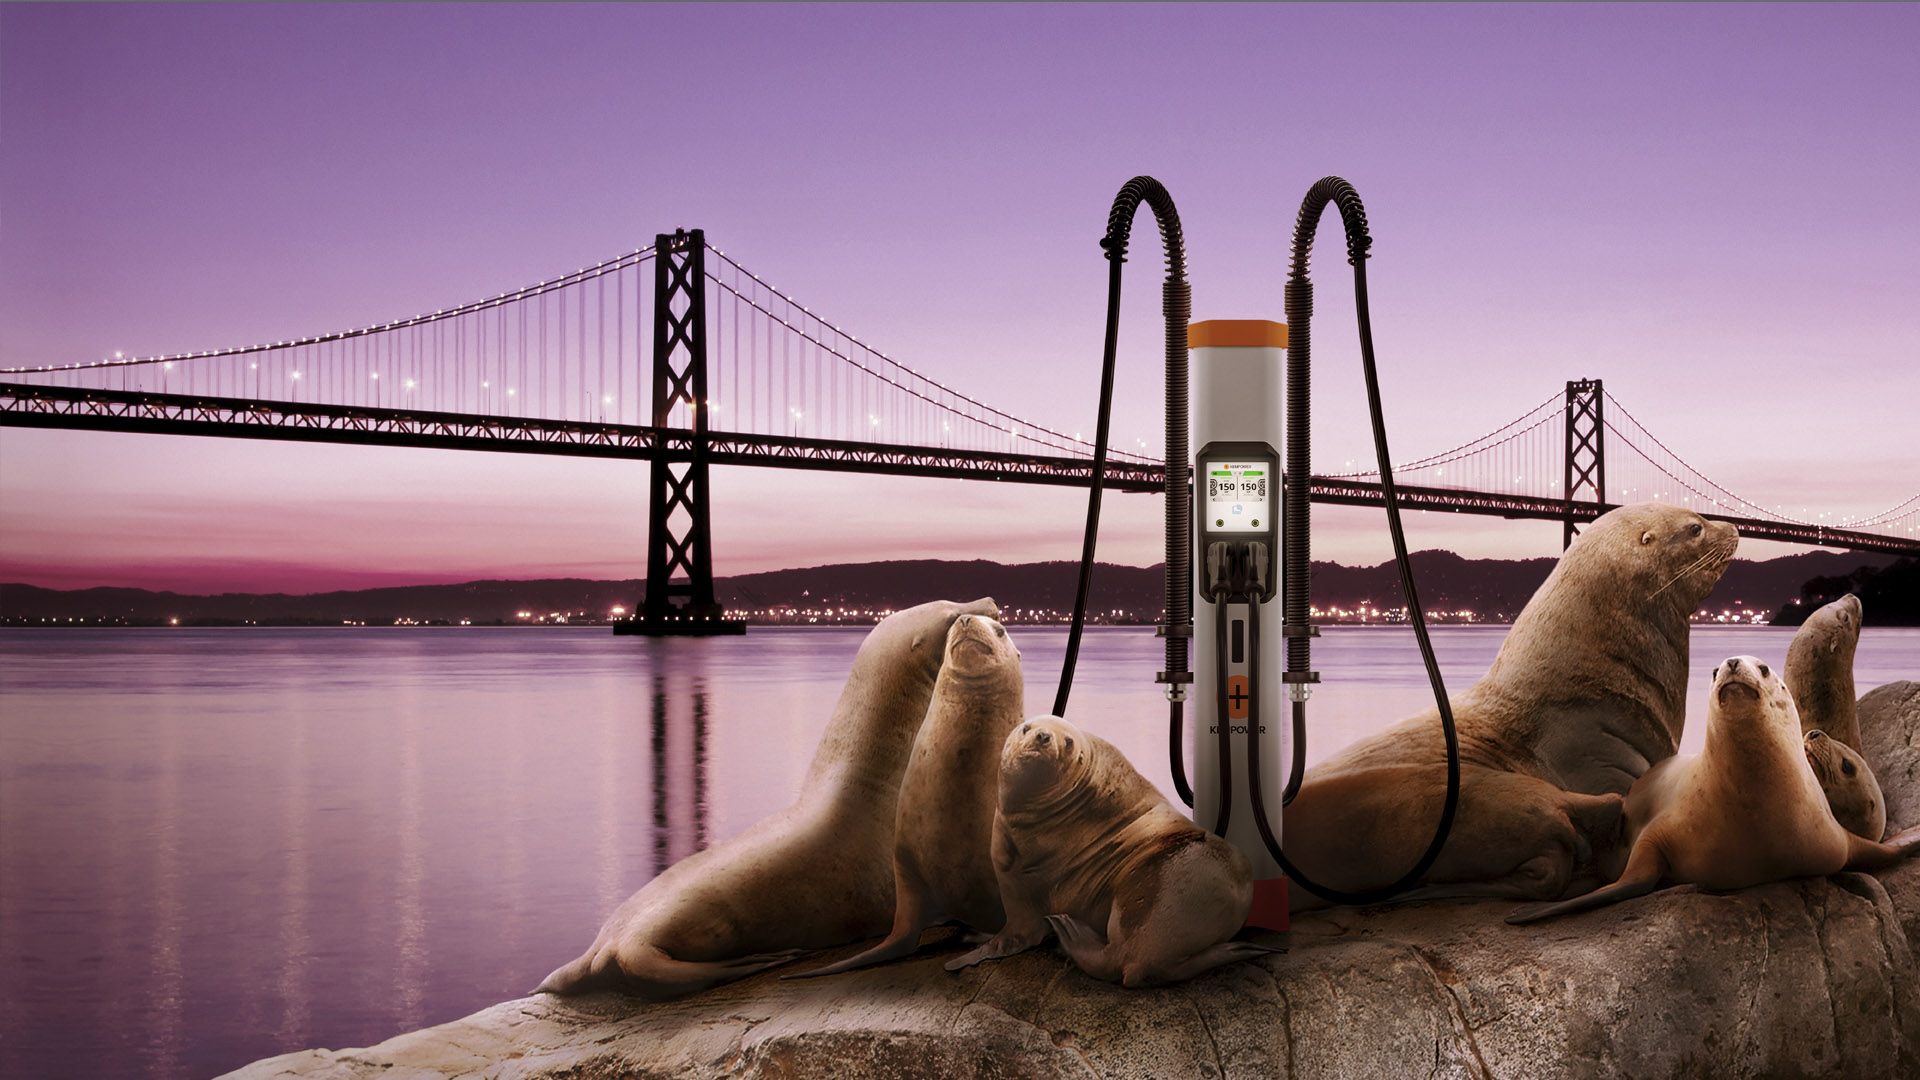 Charging into the sunset: sea lions bask by a whimsical Kempower electric vehicle charging station with a picturesque North American bridge backdrop.